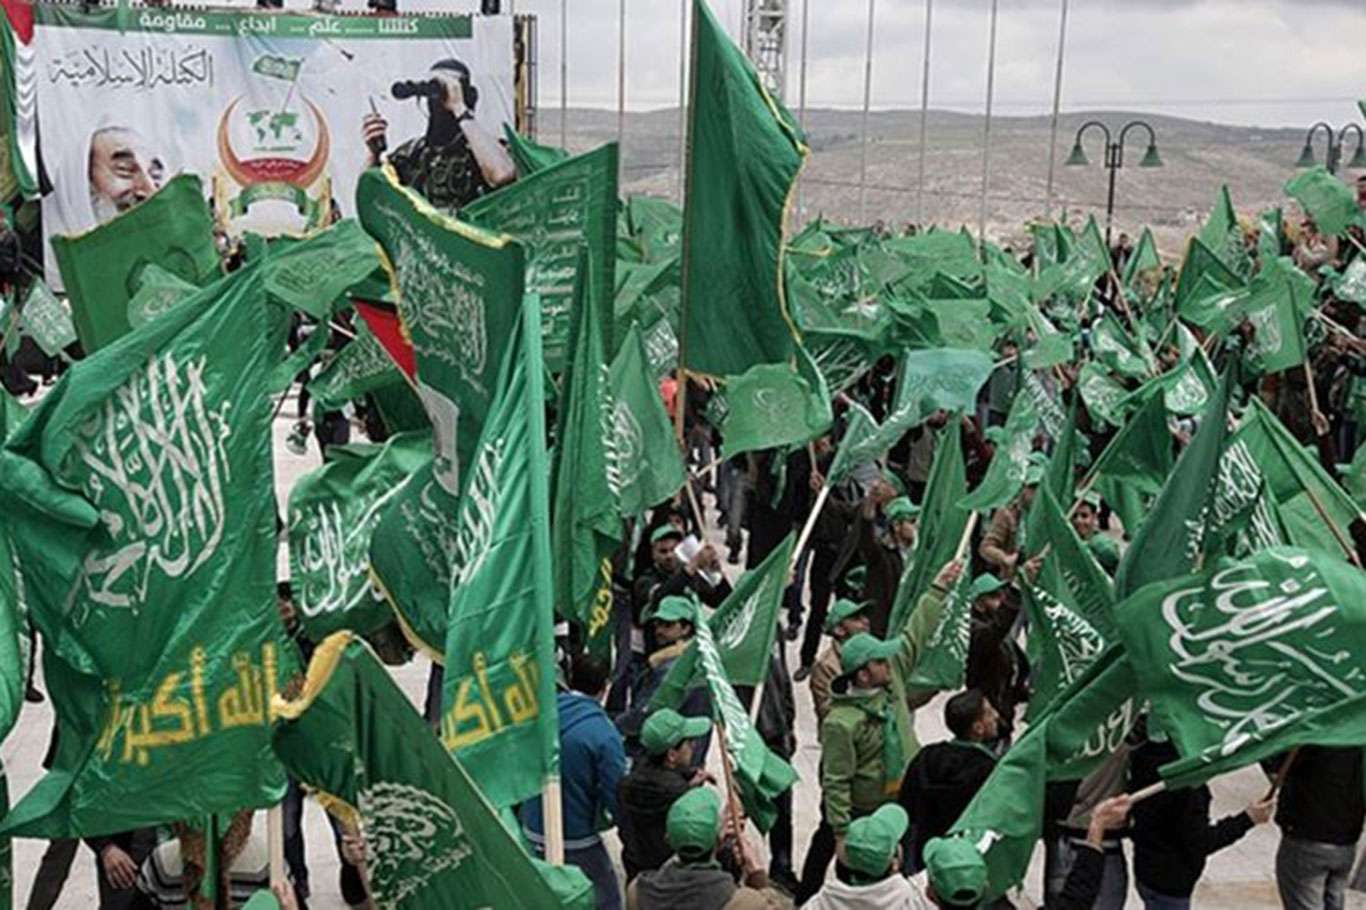 Hamas calls for releasing political detainees in West Bank